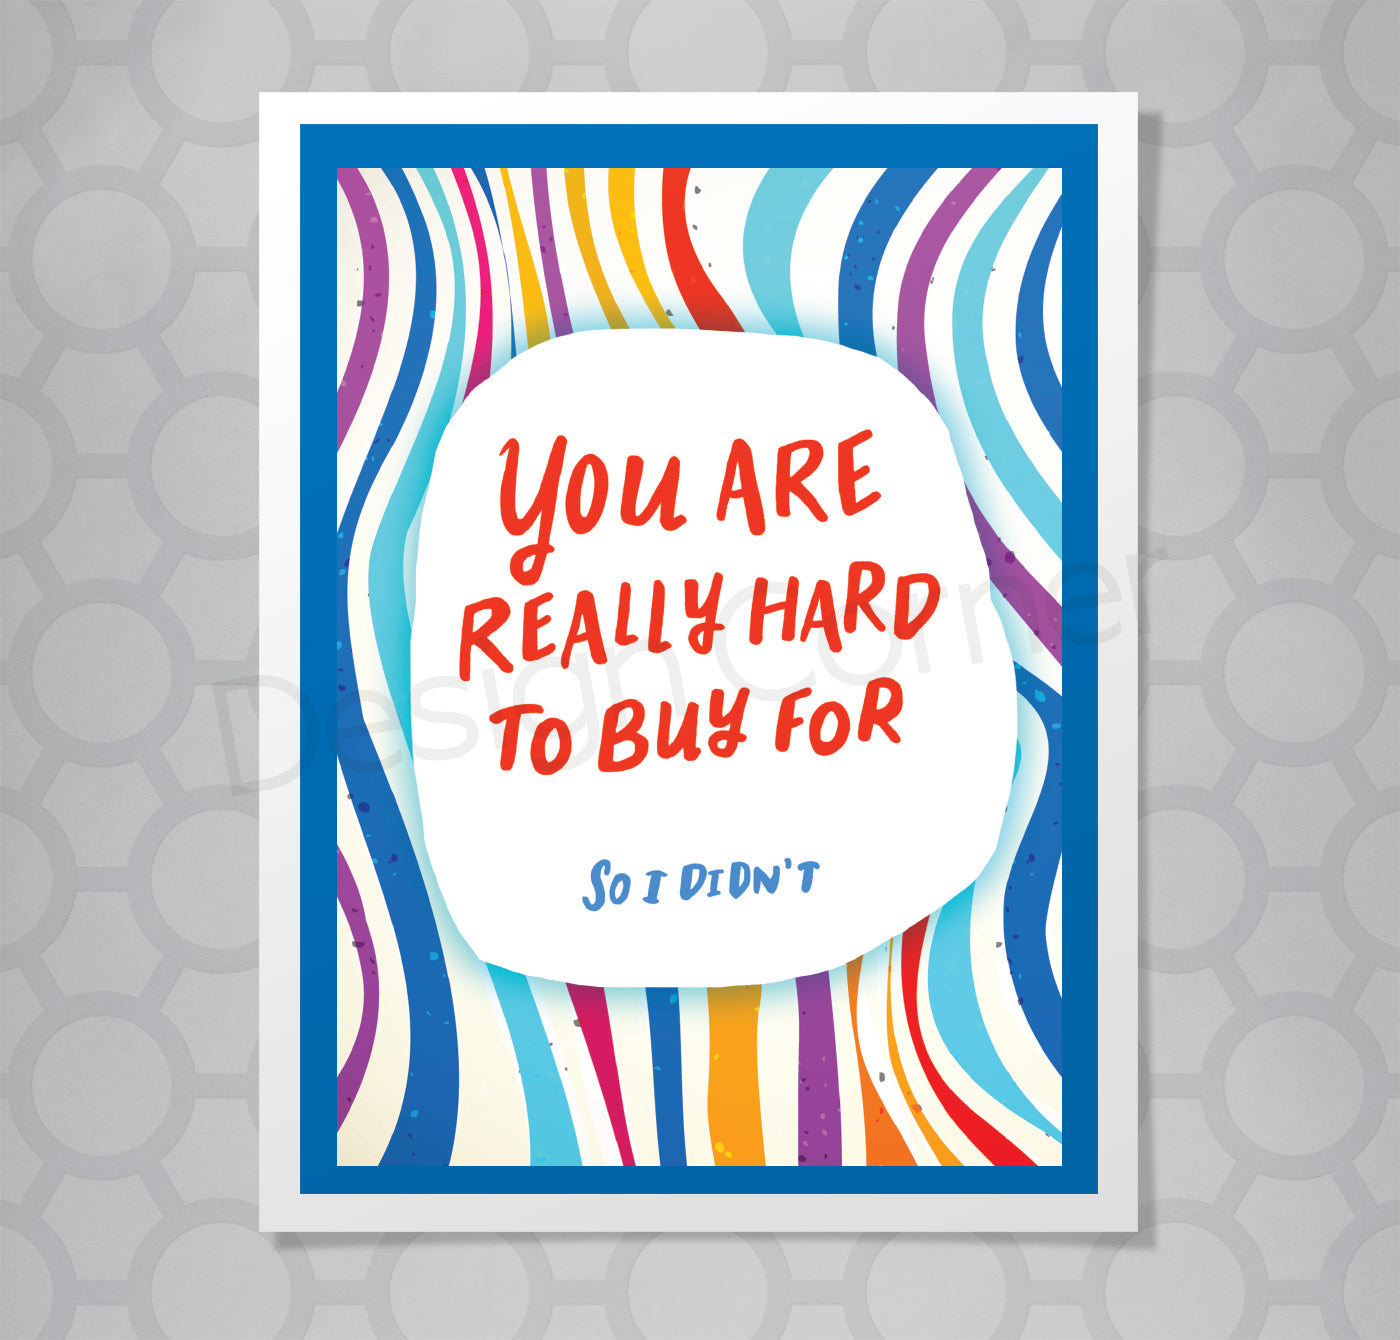 Hand lettered text on greeting card that says You are really hard to buy for. So I didn't.